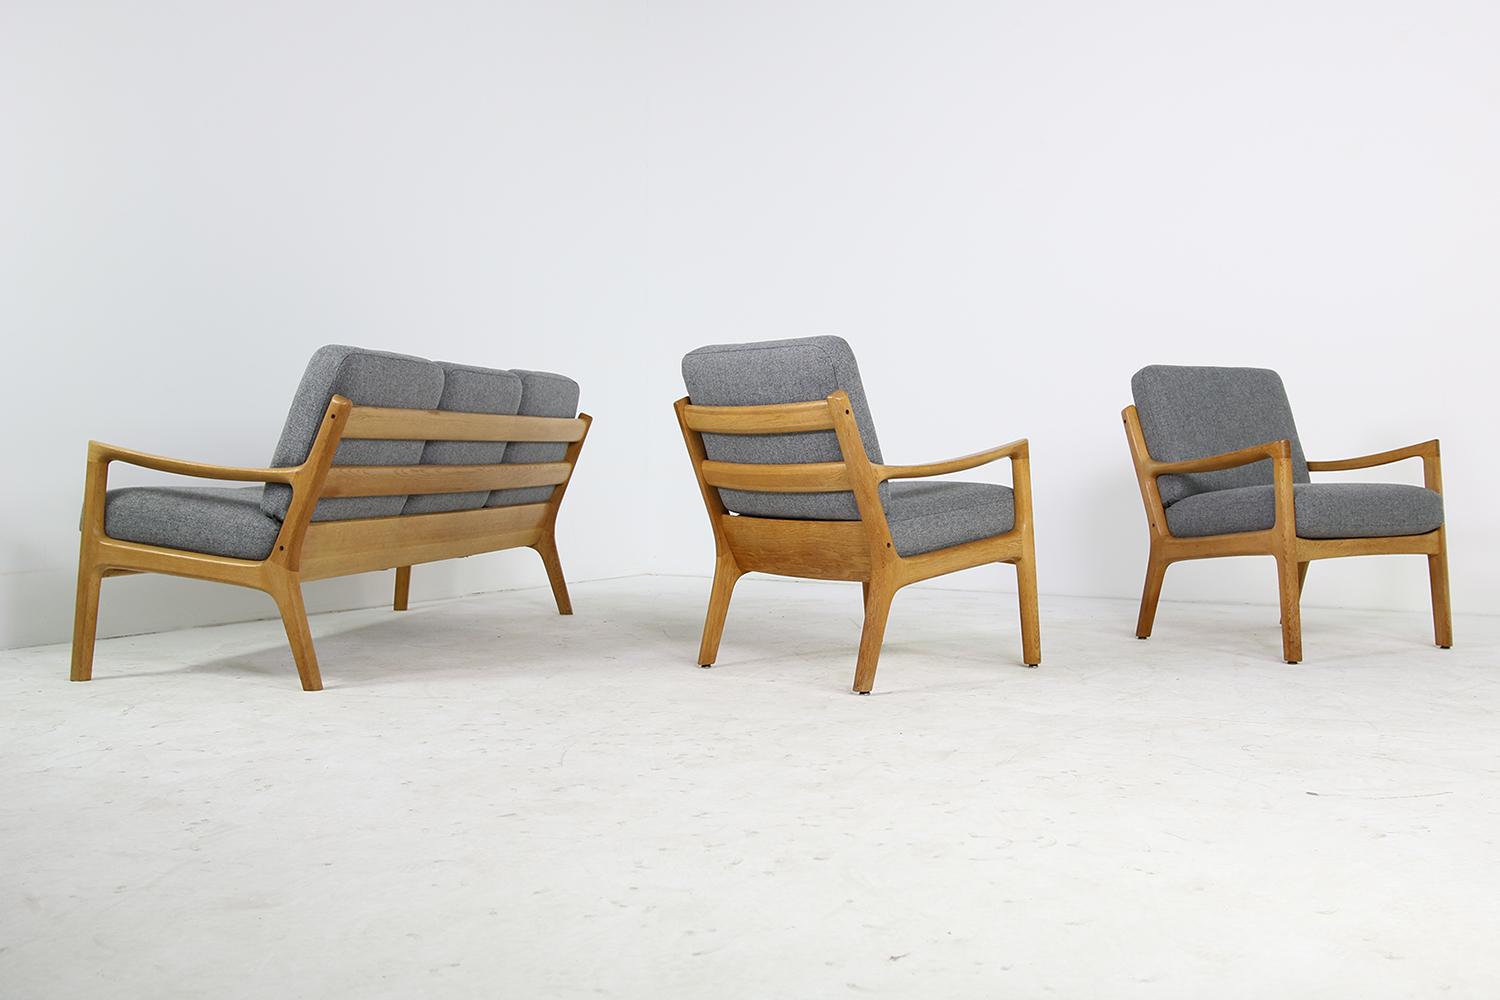 Beautiful set of 1960s Ole Wanscher easy chairs and sofa, senator series - super rare in solid oak. New upholstery in grey woven fabric. Overall a fantastic condition. Made by France & Son, Denmark.
Measures: Sofa: W 180 x D 76 x H 75cm
Chairs: W